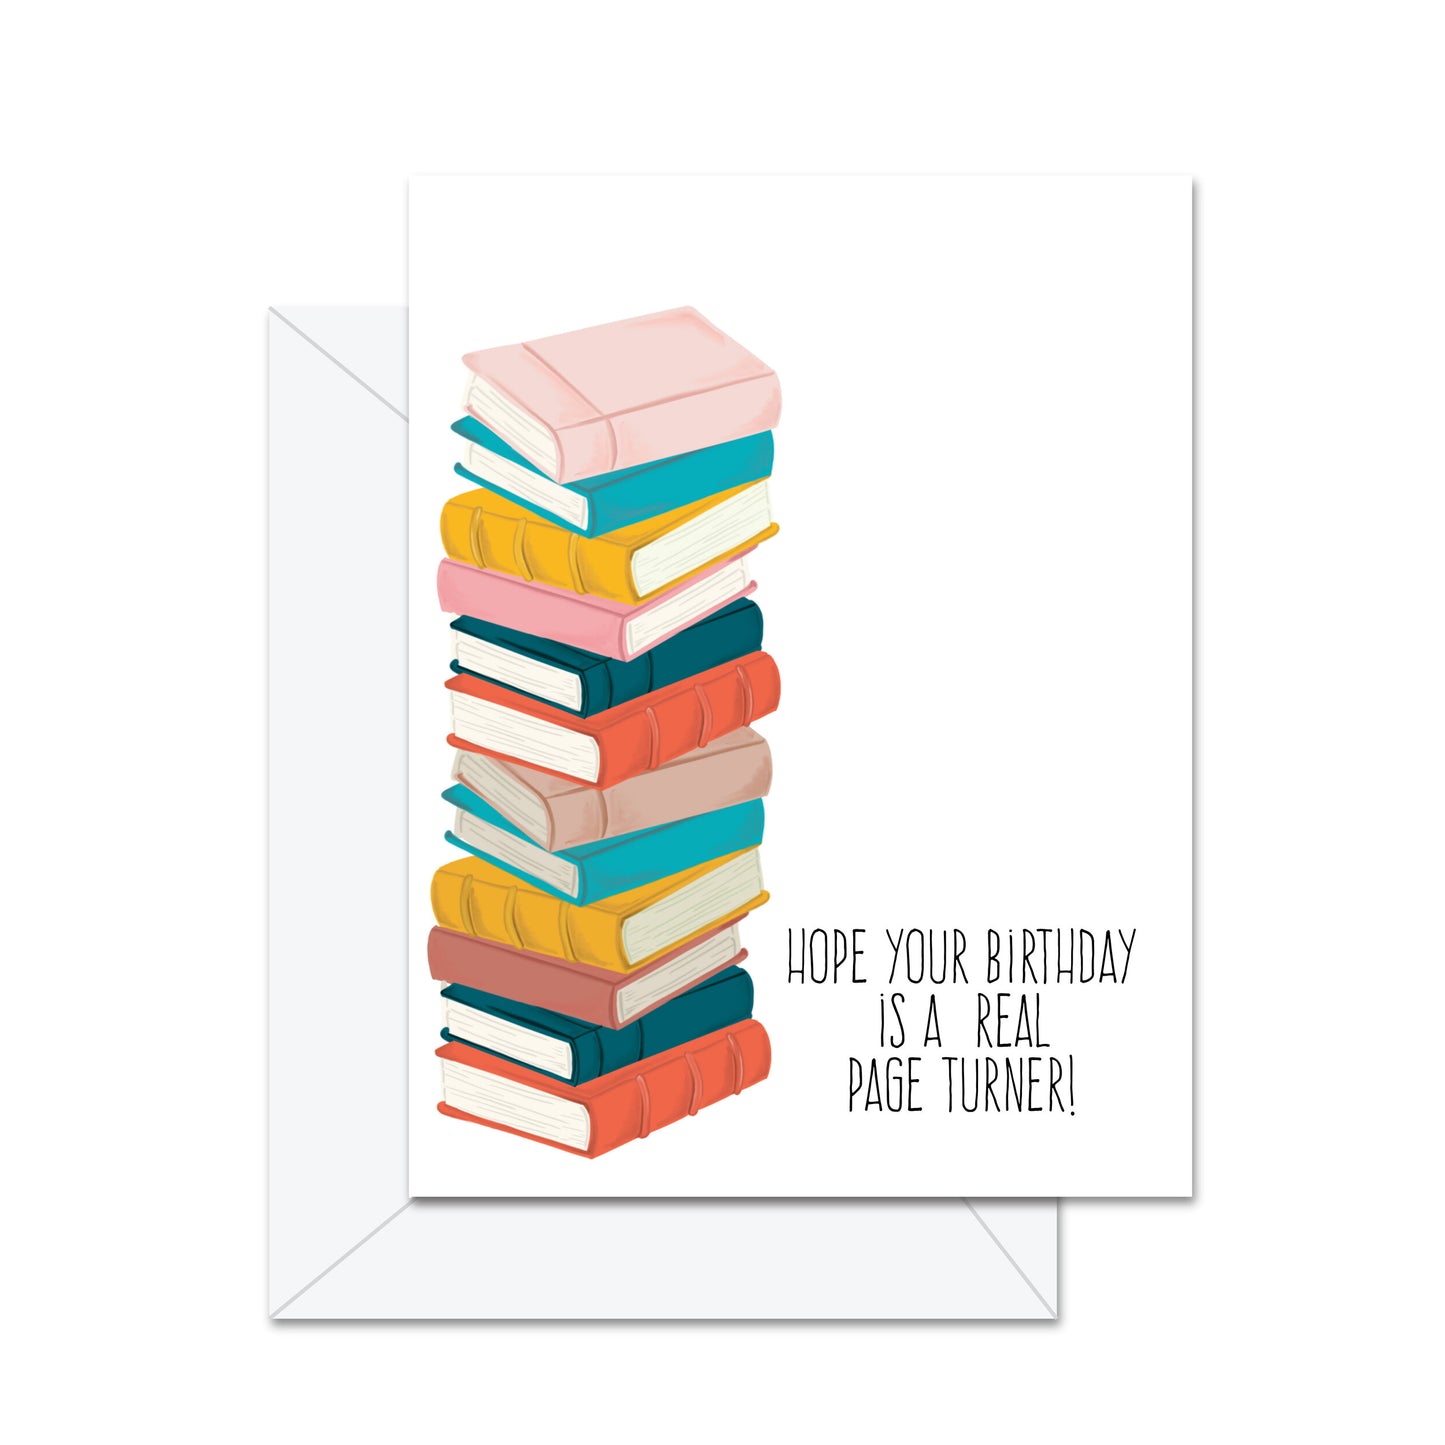 Hope Your Birthday Is A Real Page Turner - Greeting Card